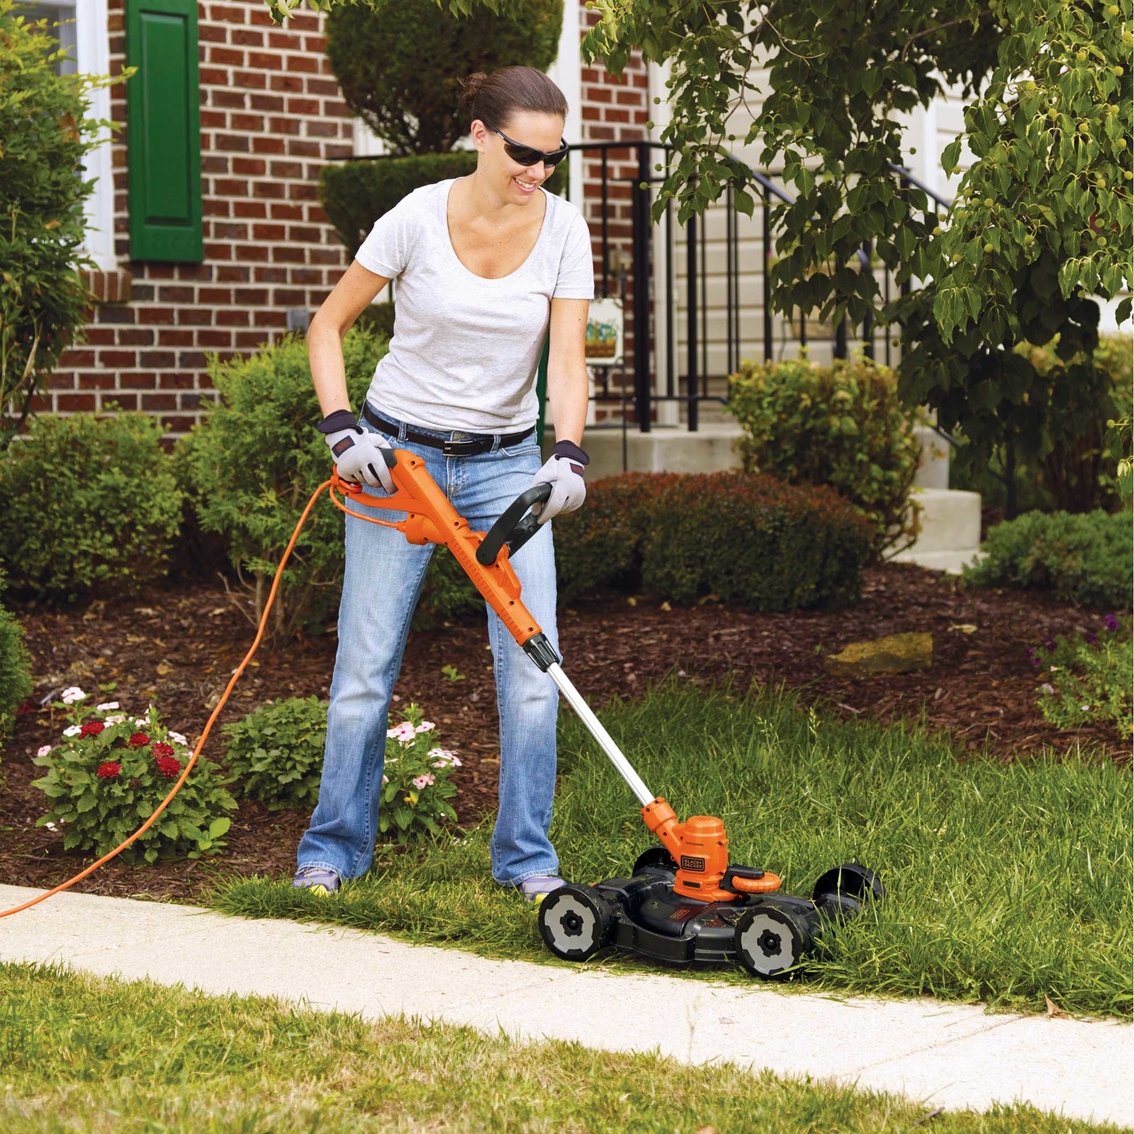 BLACK+DECKER 3-in-1 String Trimmer/Edger & Lawn Mower, 6.5-Amp, 12-Inch,  Corded (MTE912) (Power cord not included)